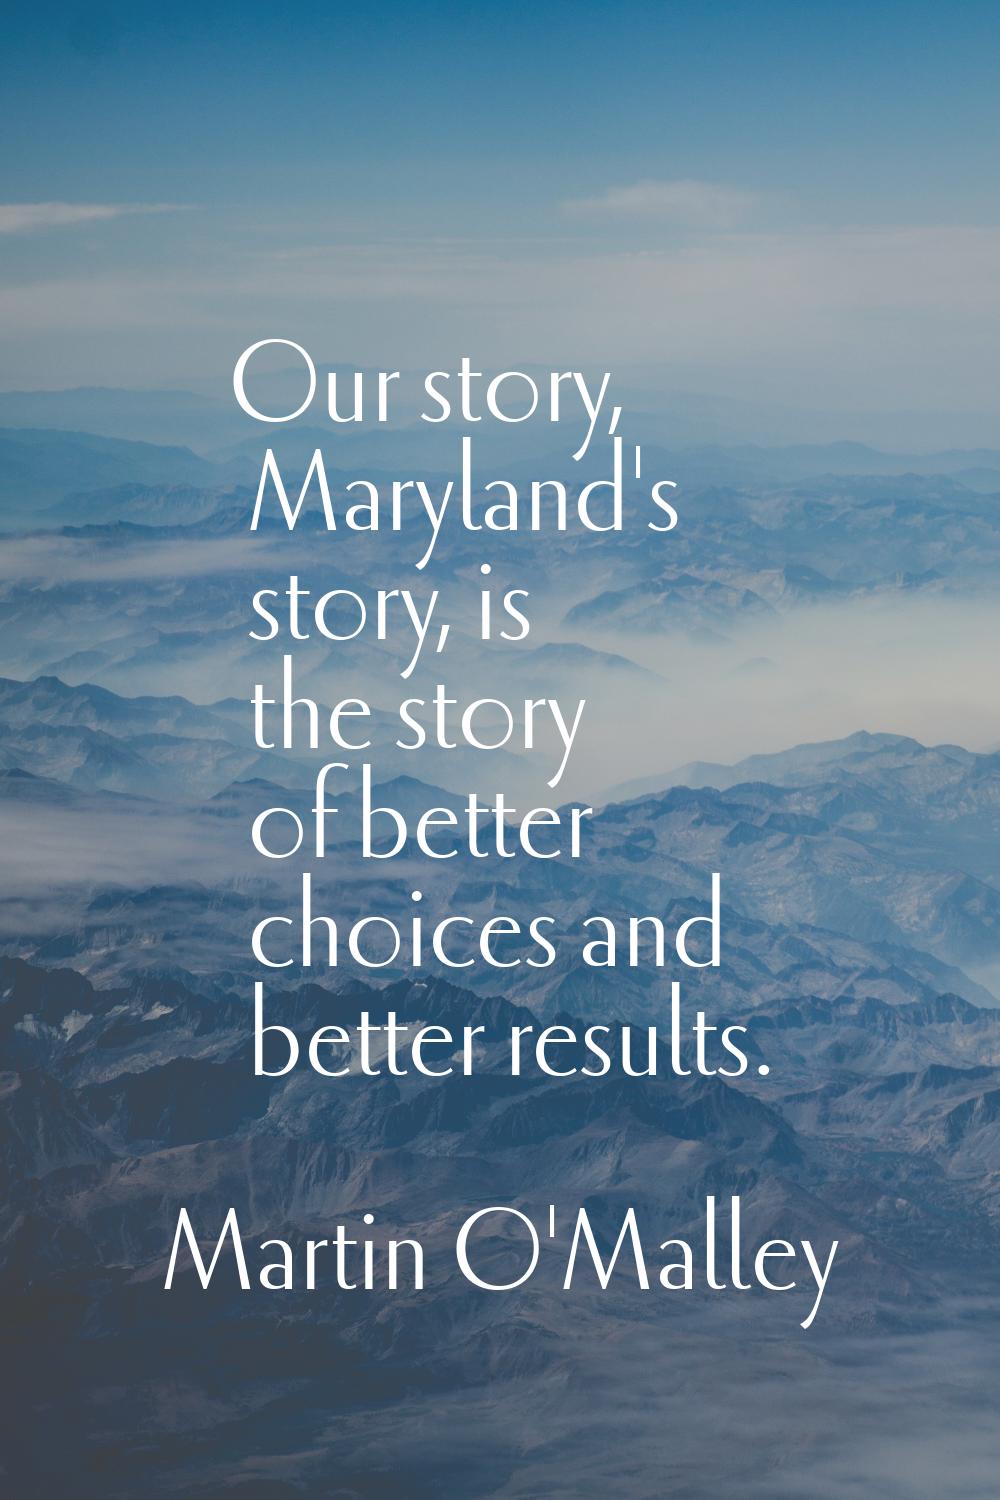 Our story, Maryland's story, is the story of better choices and better results.